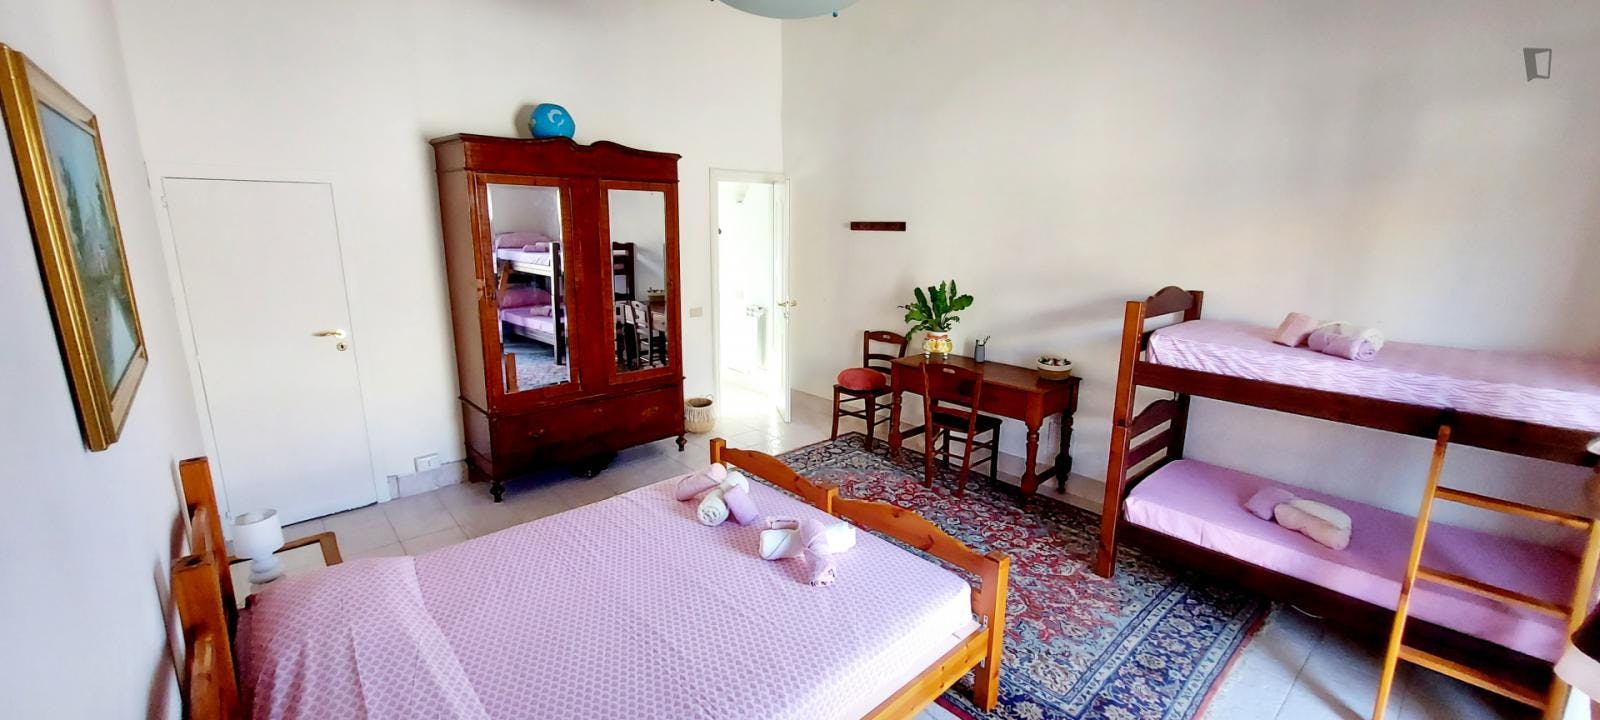 Double room with private bath, kitchen and balcony in Palermo's historic center